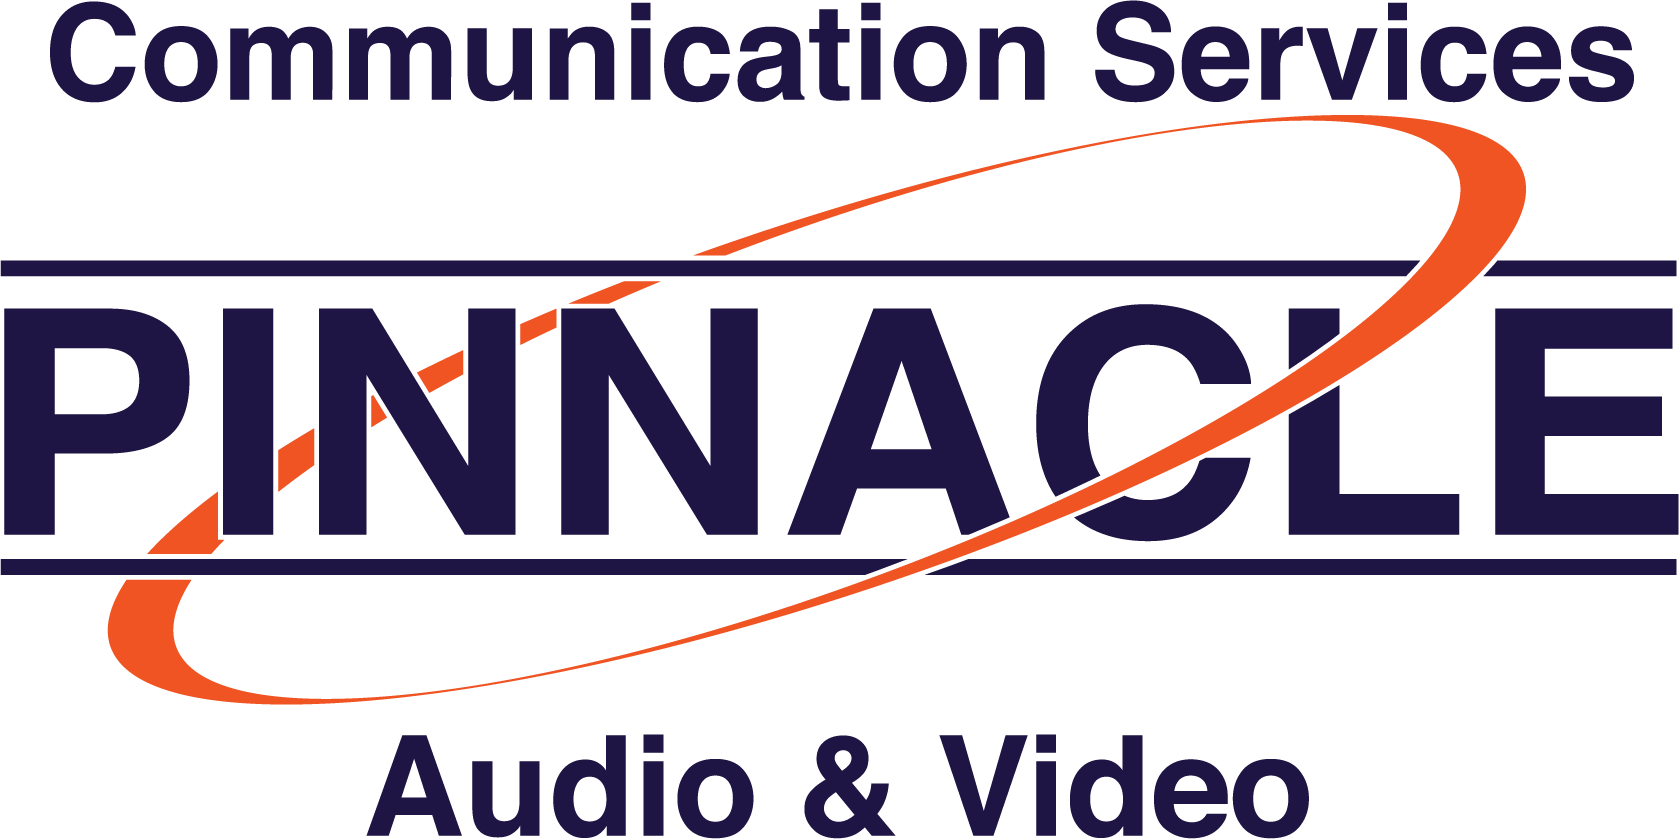 Pinnacle Communication Services